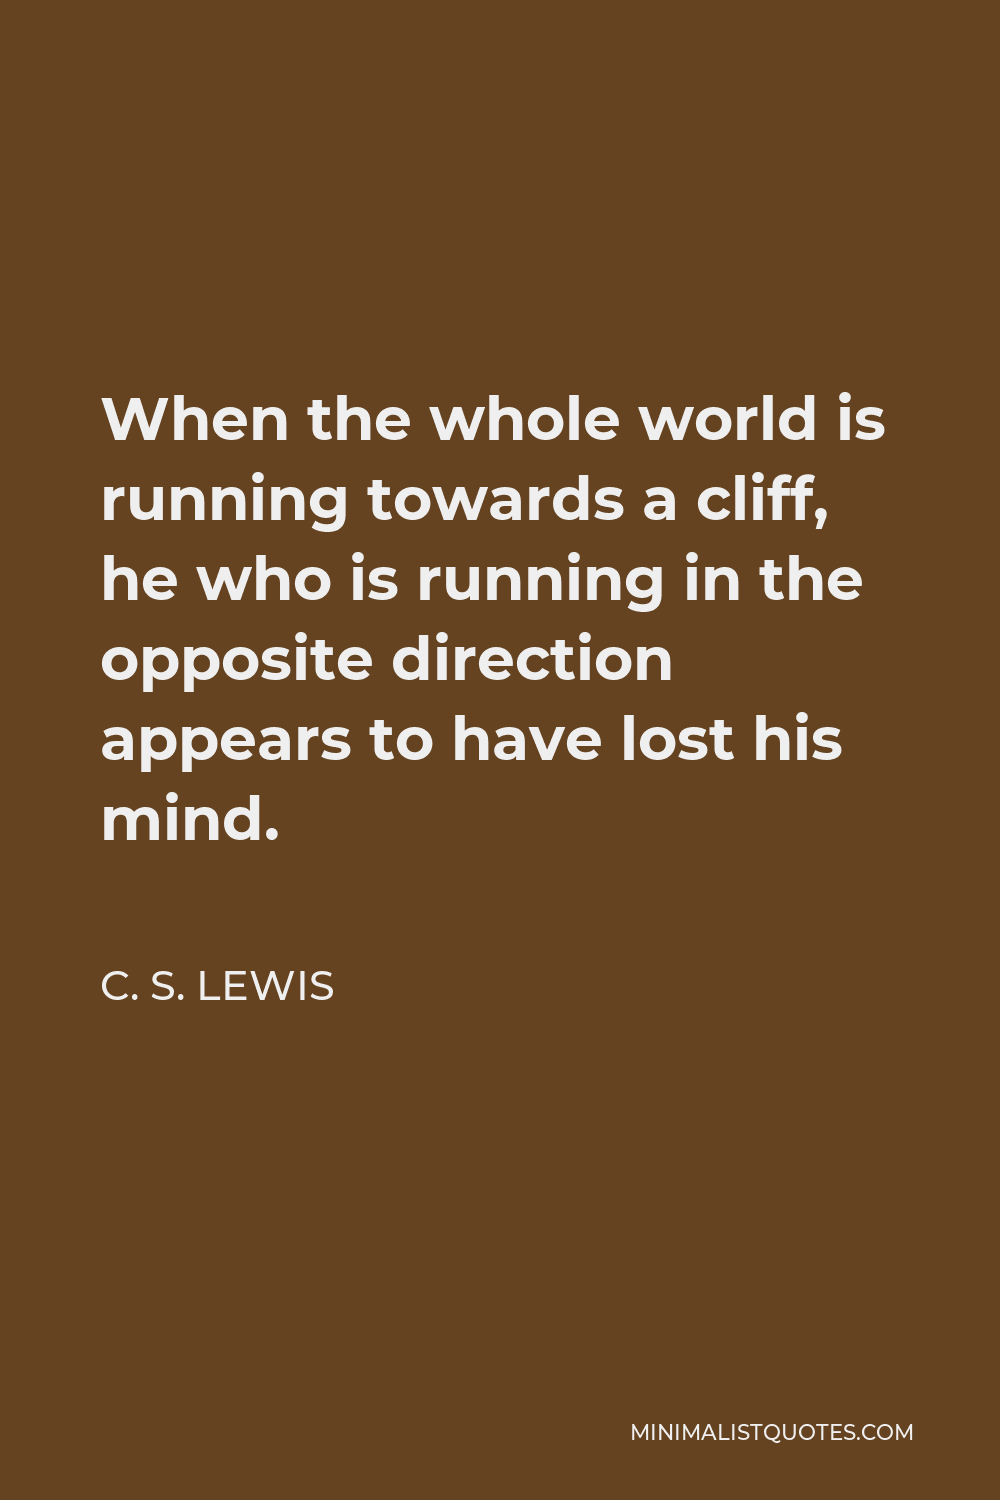 C. S. Lewis Quote - When the whole world is running towards a cliff, he who is running in the opposite direction appears to have lost his mind.